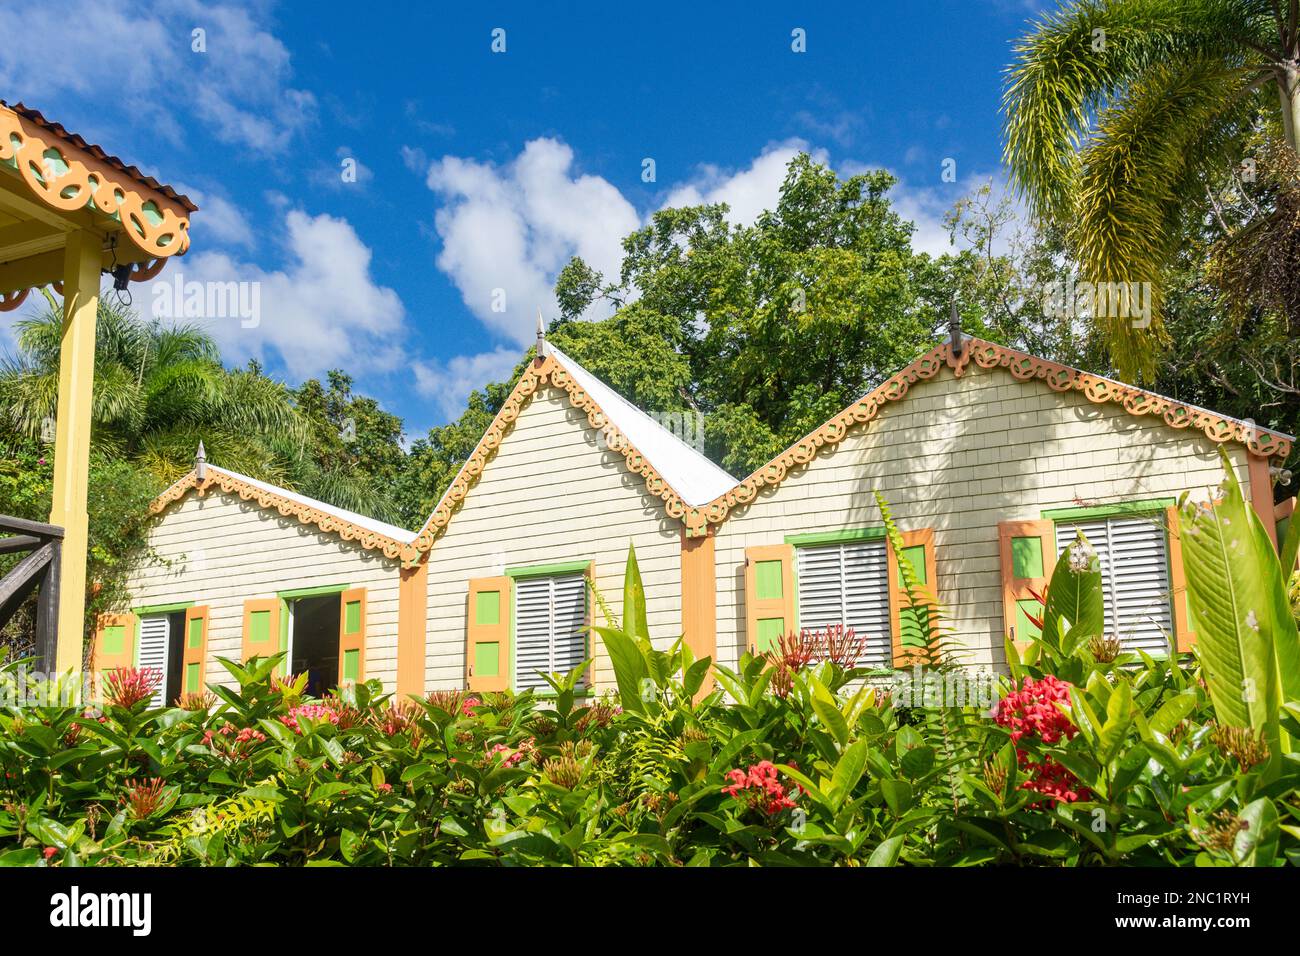 Garden at Romney Manor (1626) plantation estate house, Old Road Town, St. Kitts, St. Kitts and Nevis, Lesser Antilles, Caribbean Stock Photo